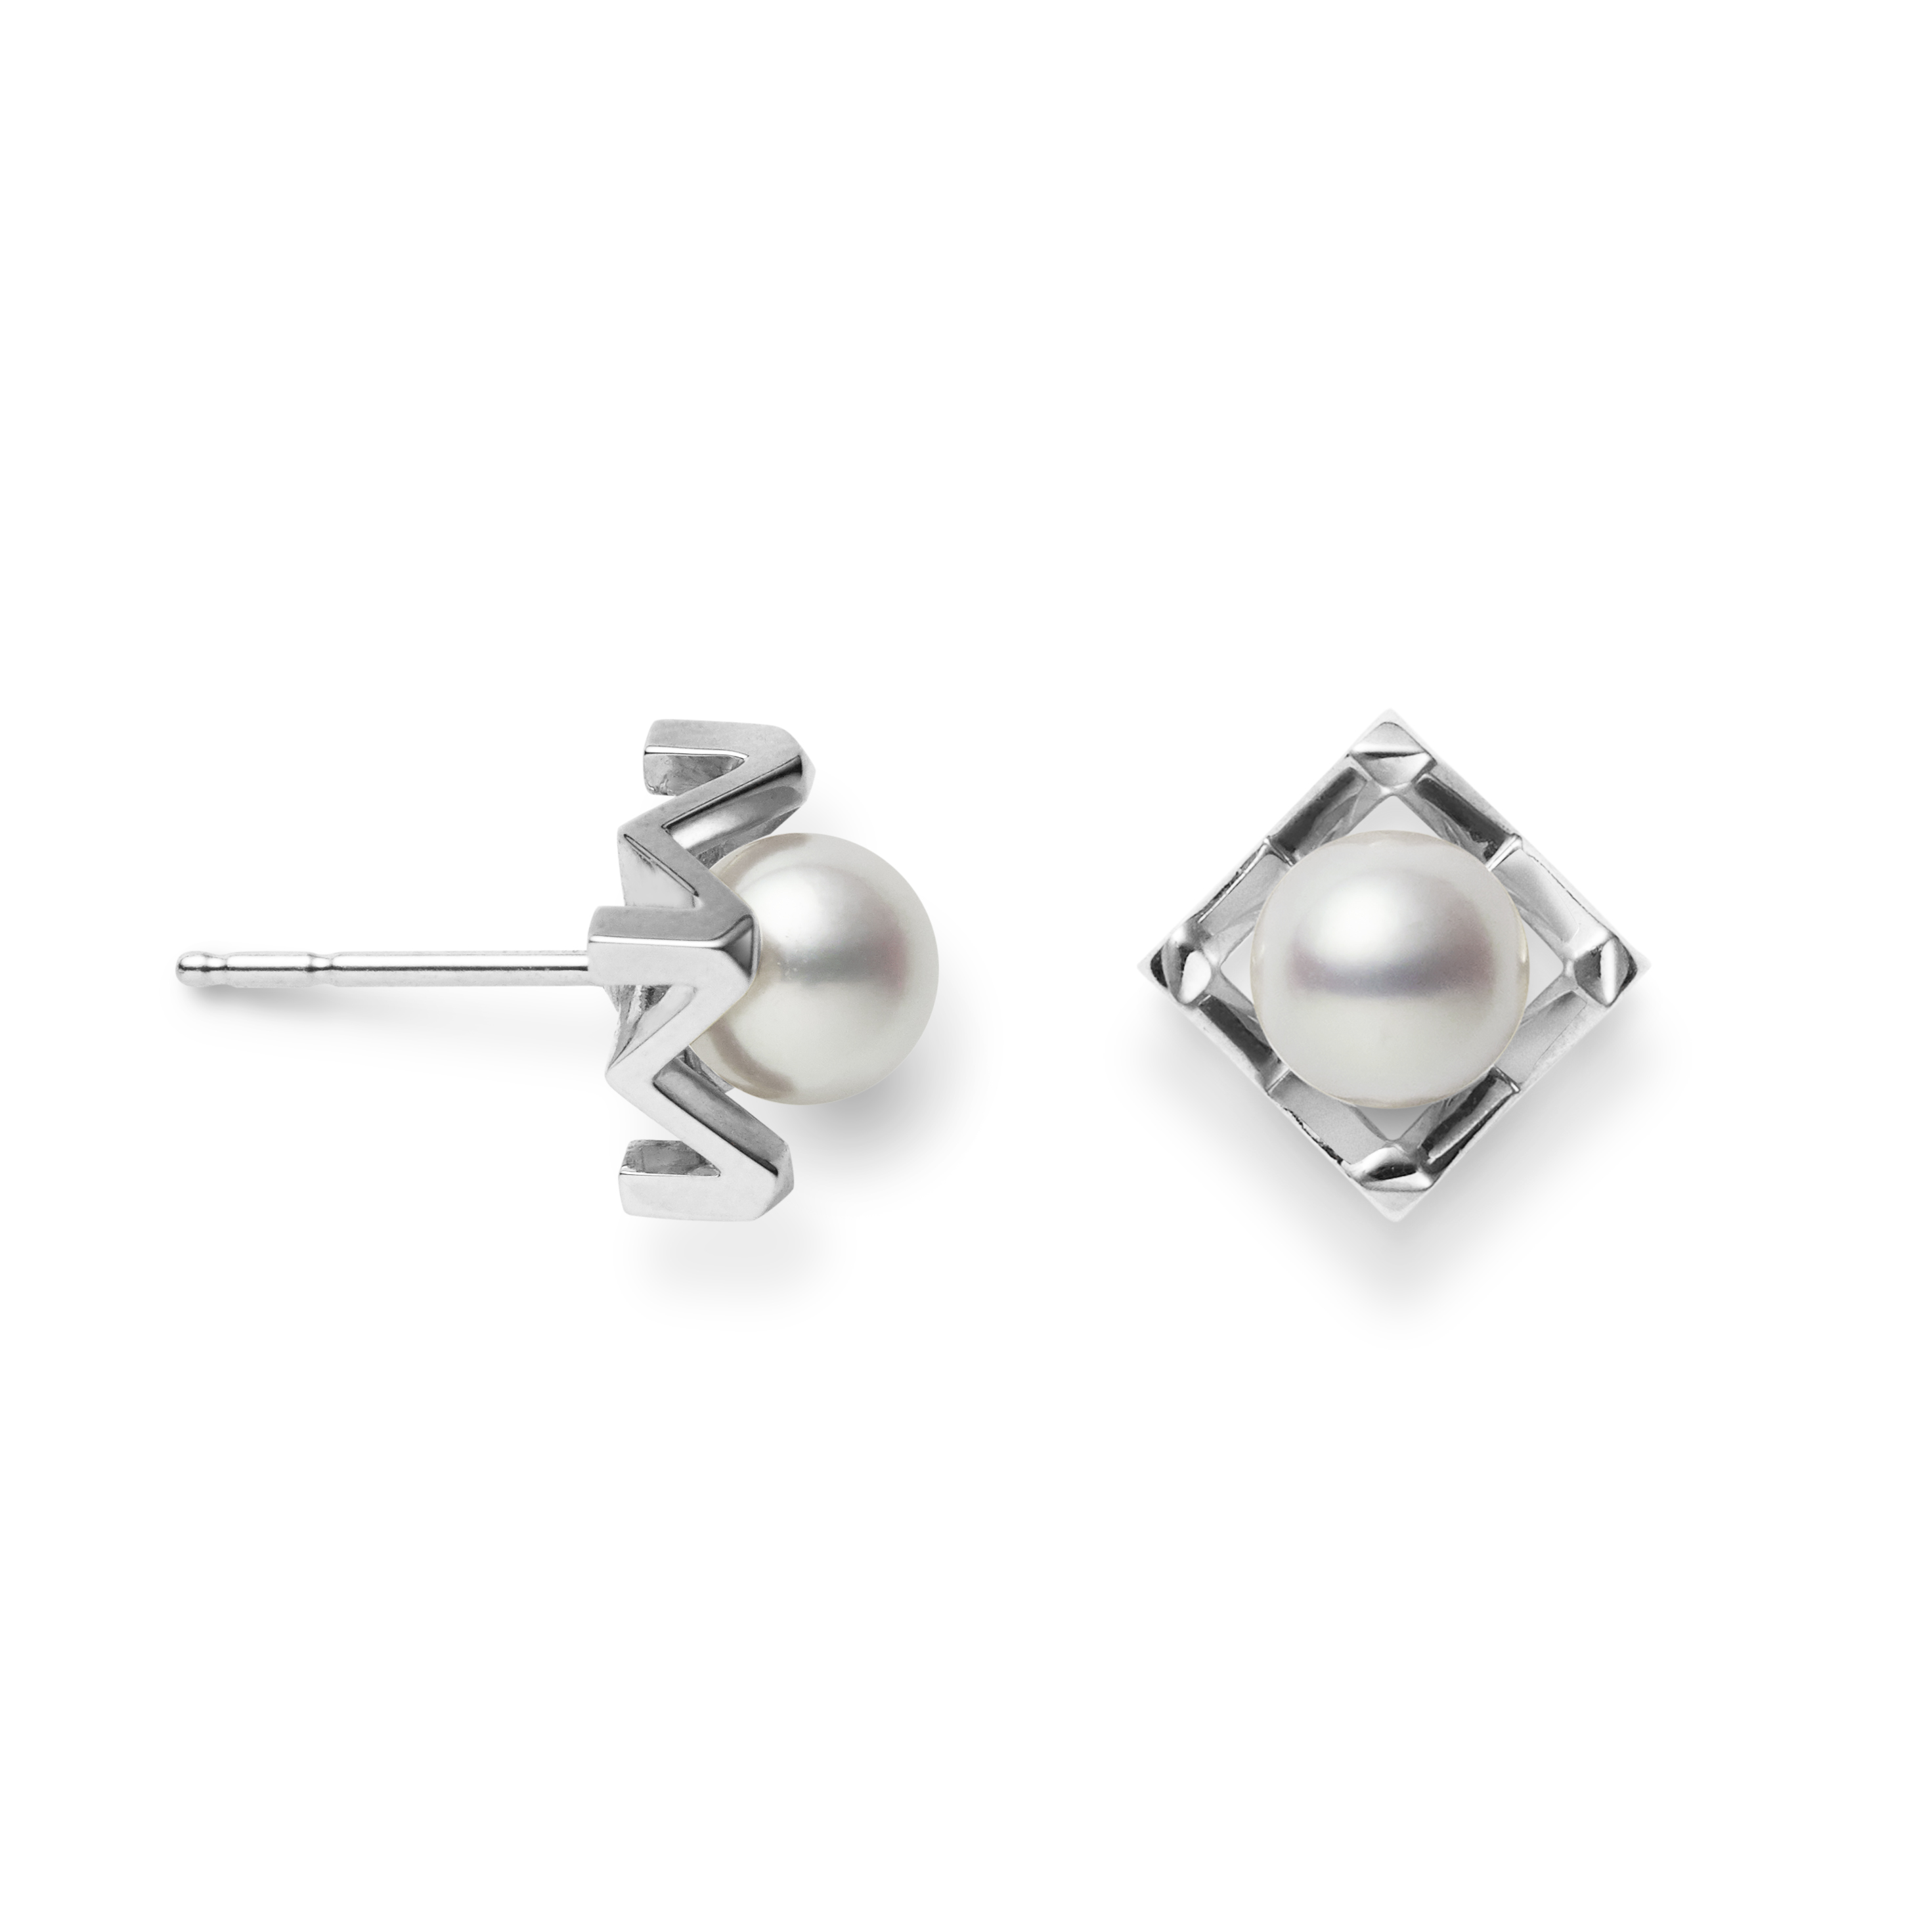 Mikimoto M Collection Akoya Cultured Pearl Earrings in 18K White Gold 0